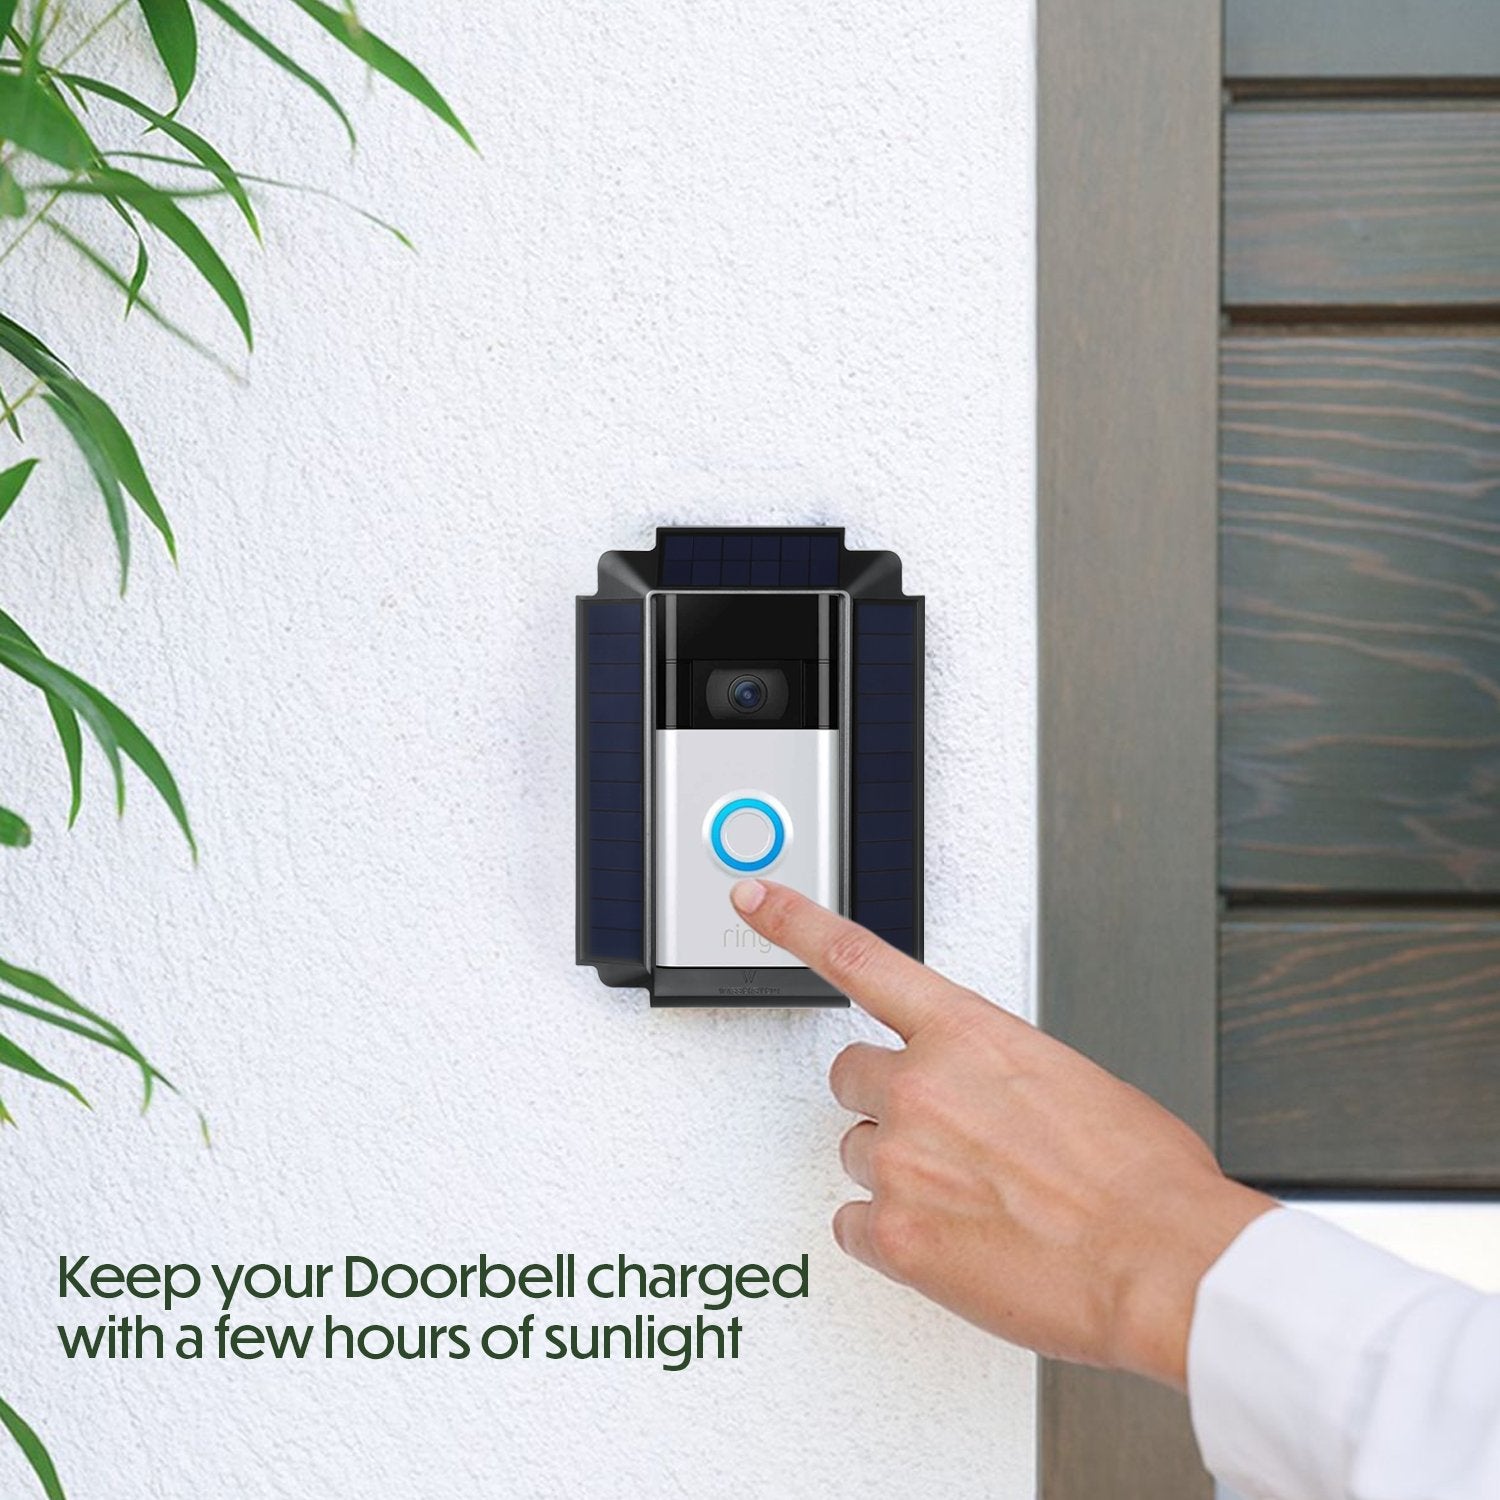 Best solar panel options to keep your Ring doorbell charged